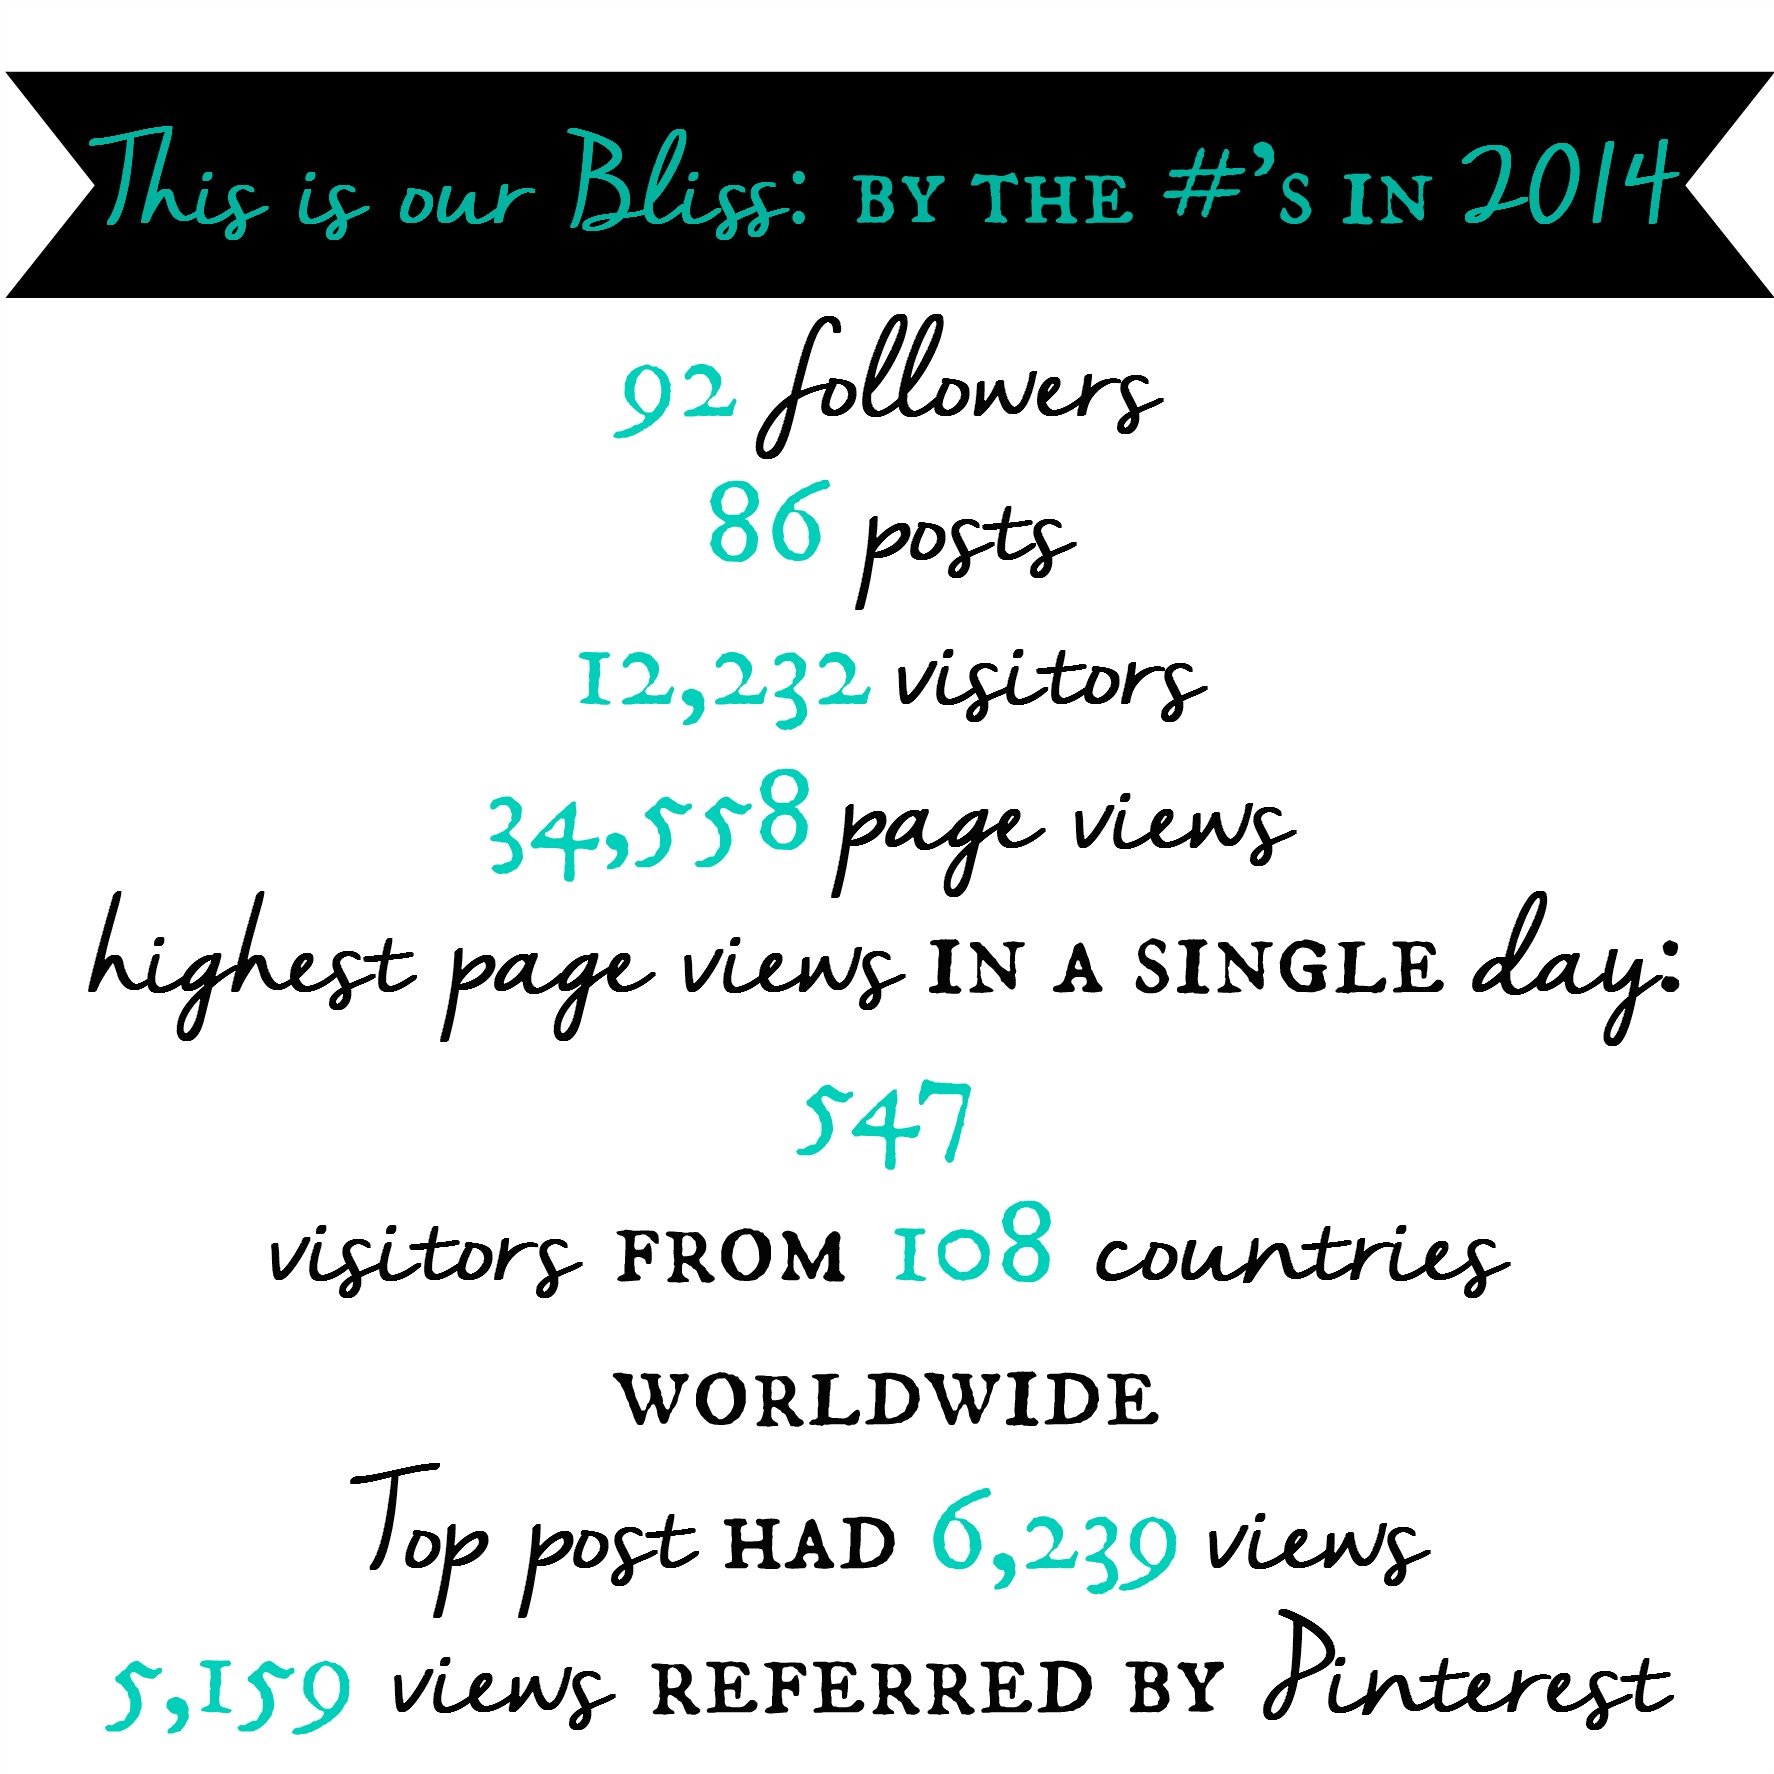 This is our Bliss by the numbers in 2014